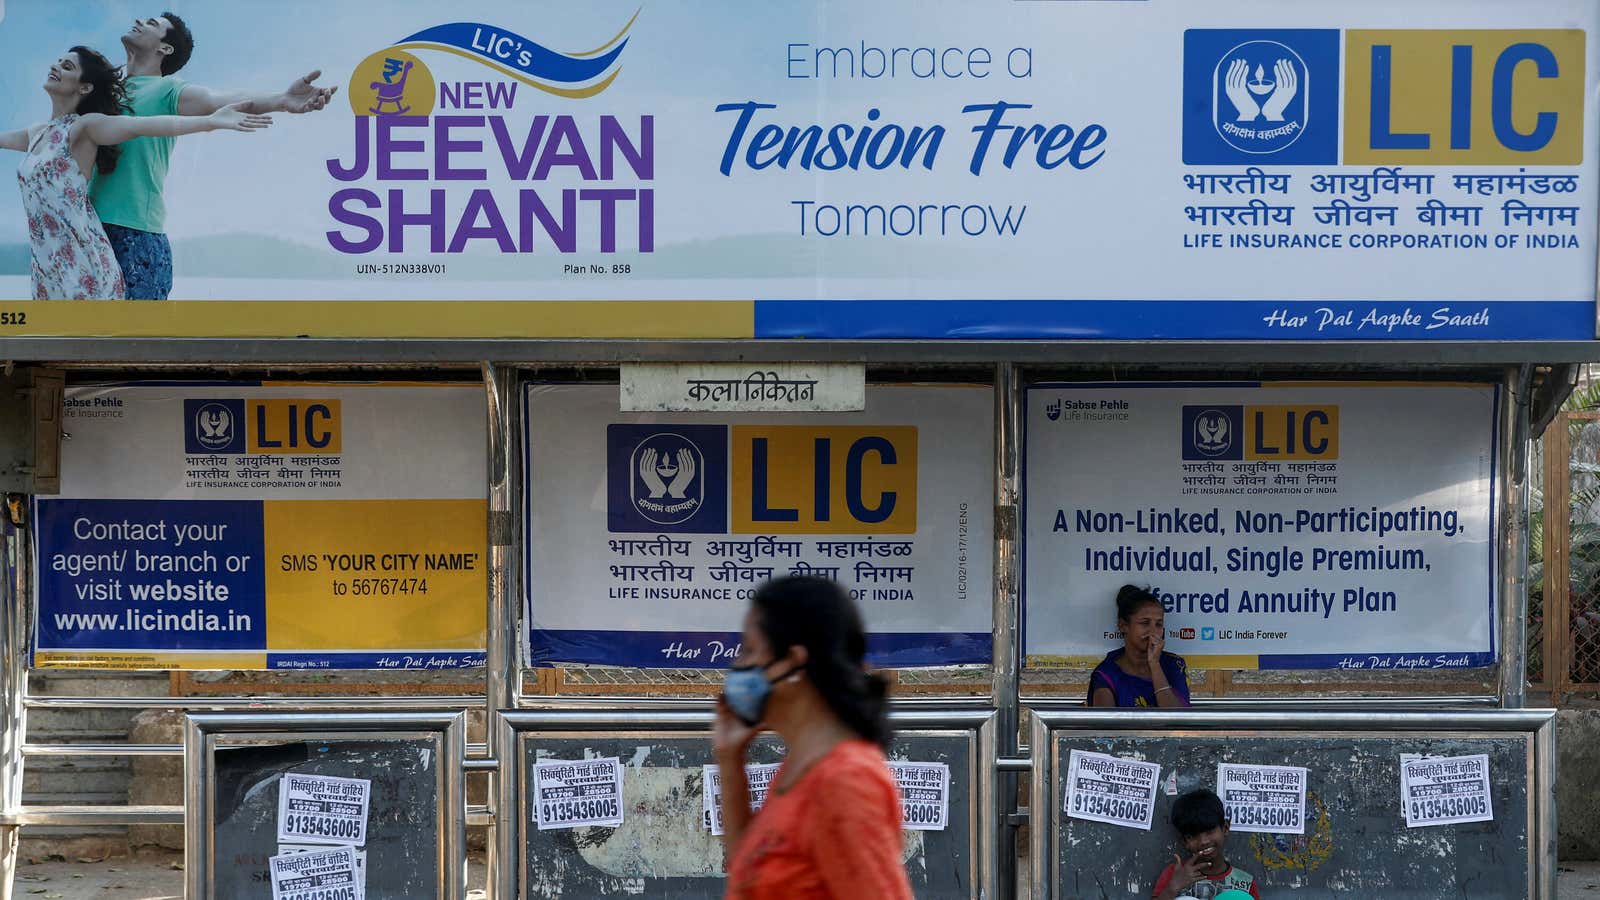 A woman walks past a bus stop with Life Insurance Corporation of India (LIC) advertisement in Mumbai, India, January 31, 2022.